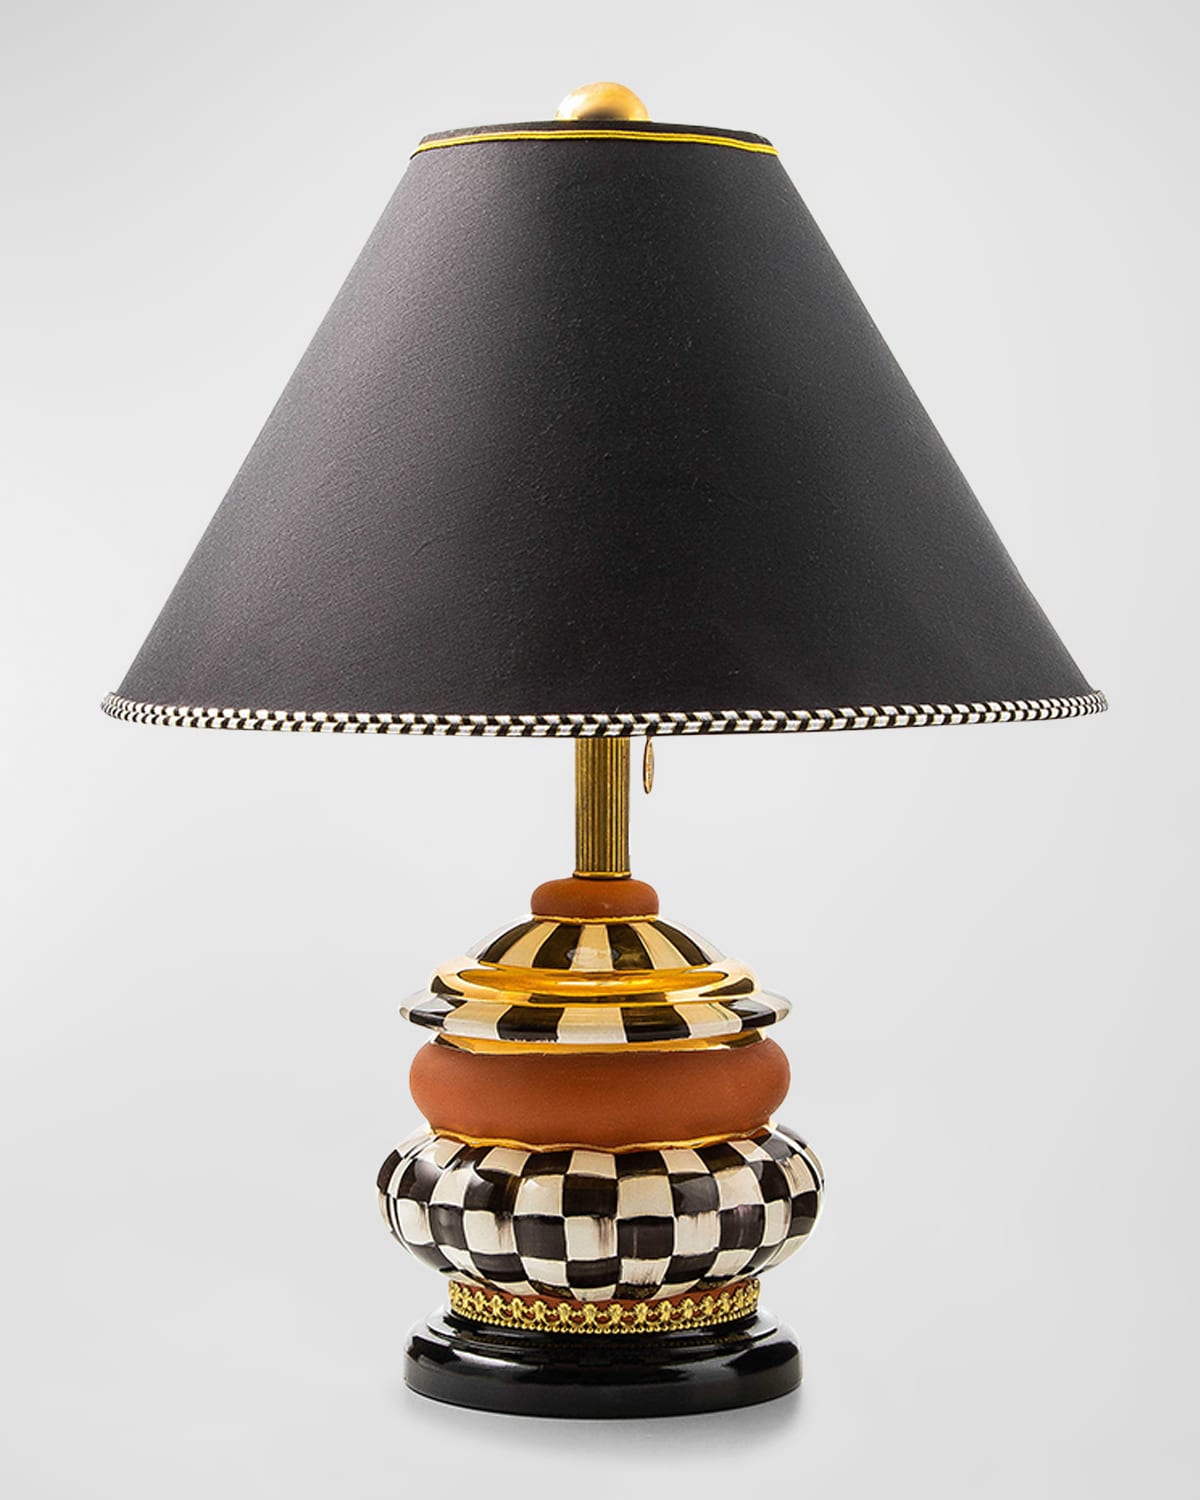 Mackenzie-childs Groovy Courtly Check Table Lamp In Multi